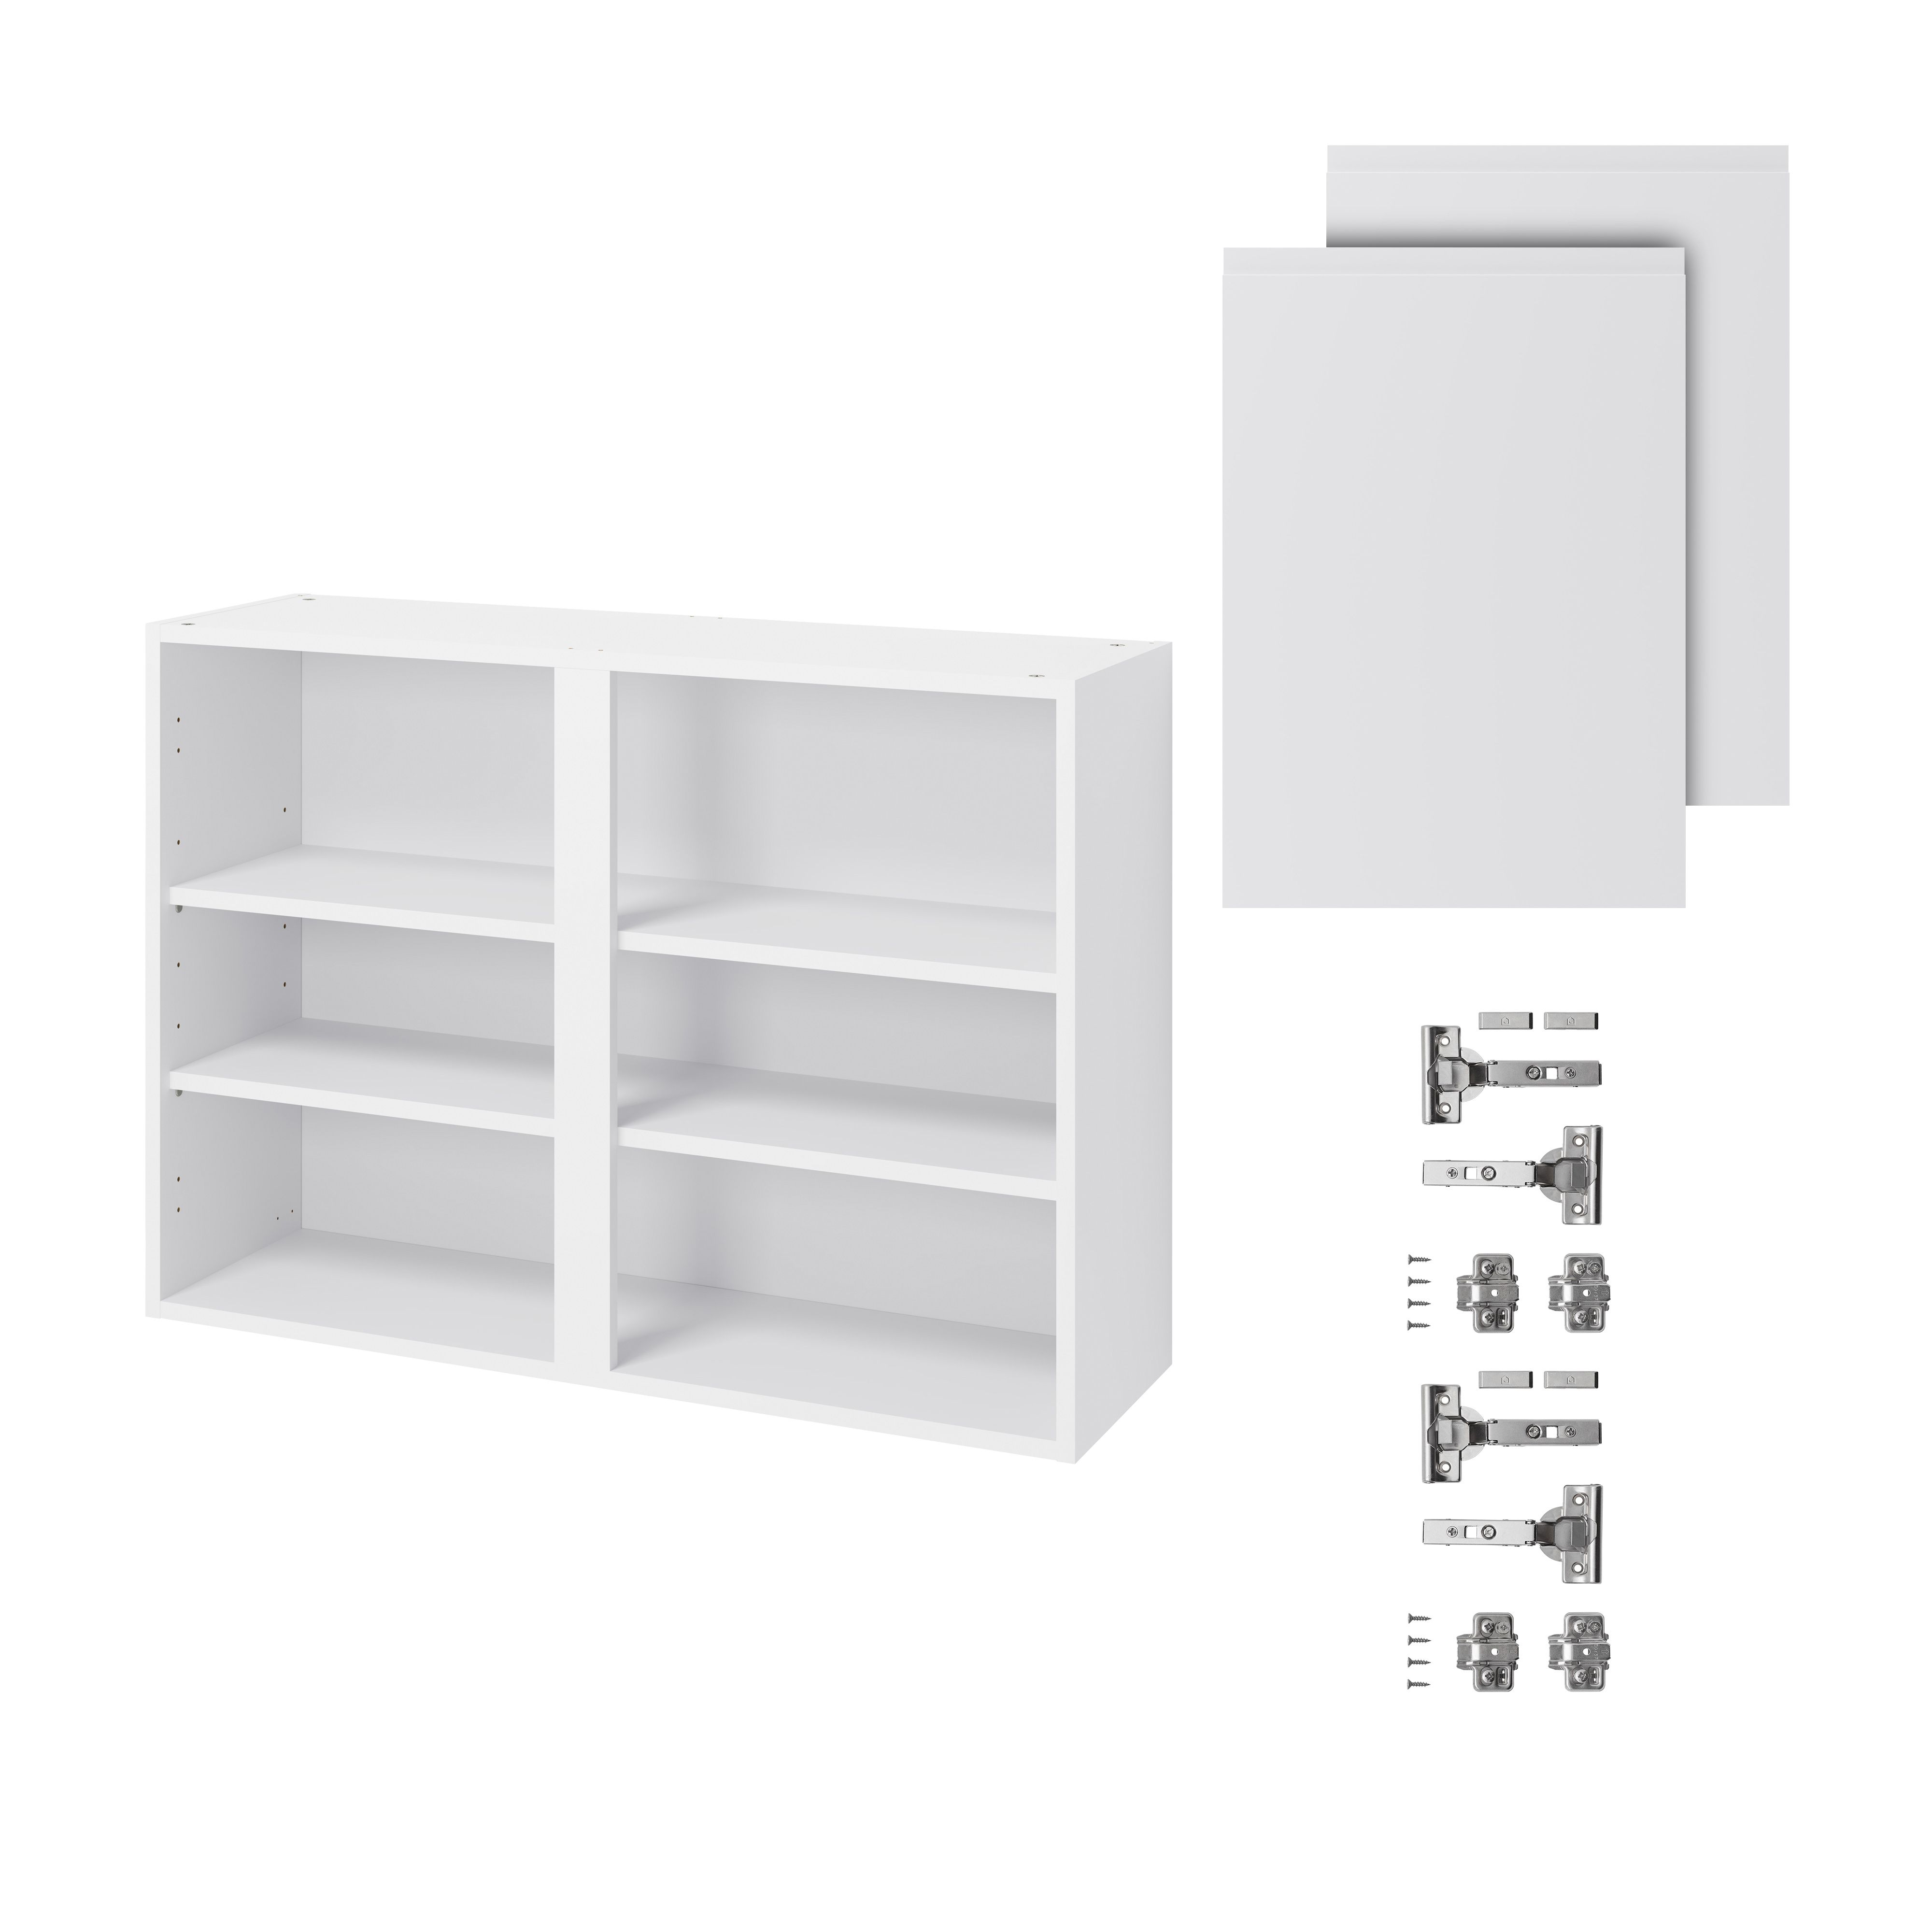 GoodHome Garcinia Gloss white integrated handle Wall Kitchen cabinet (W)1000mm (H)720mm